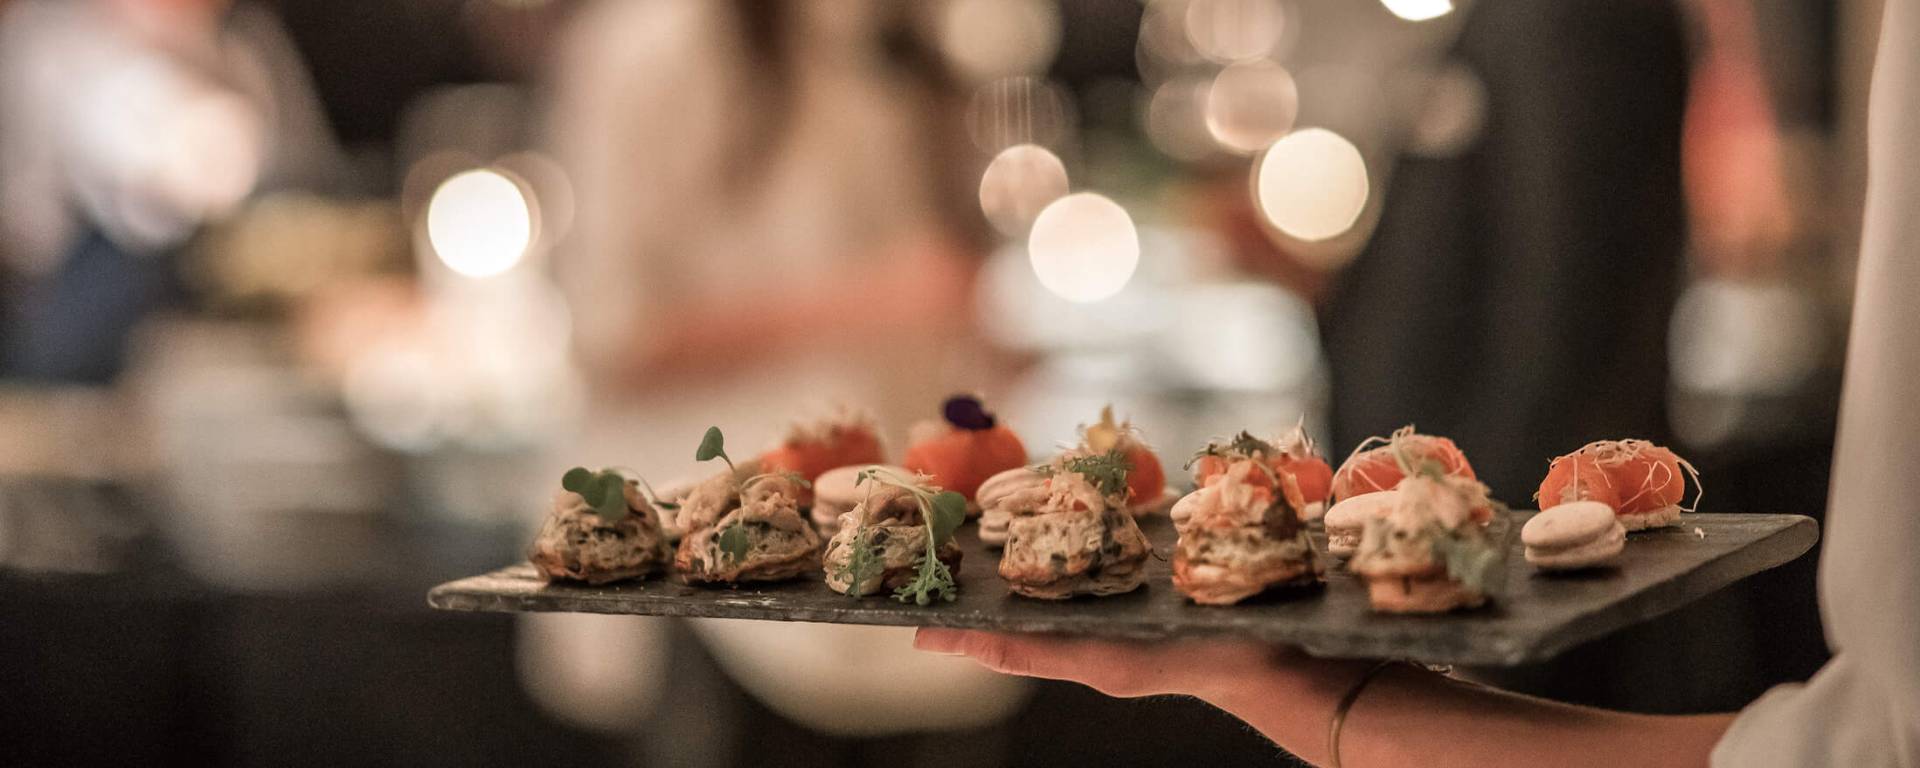 server with slate tray of appetizers walks toward two people blurry in background